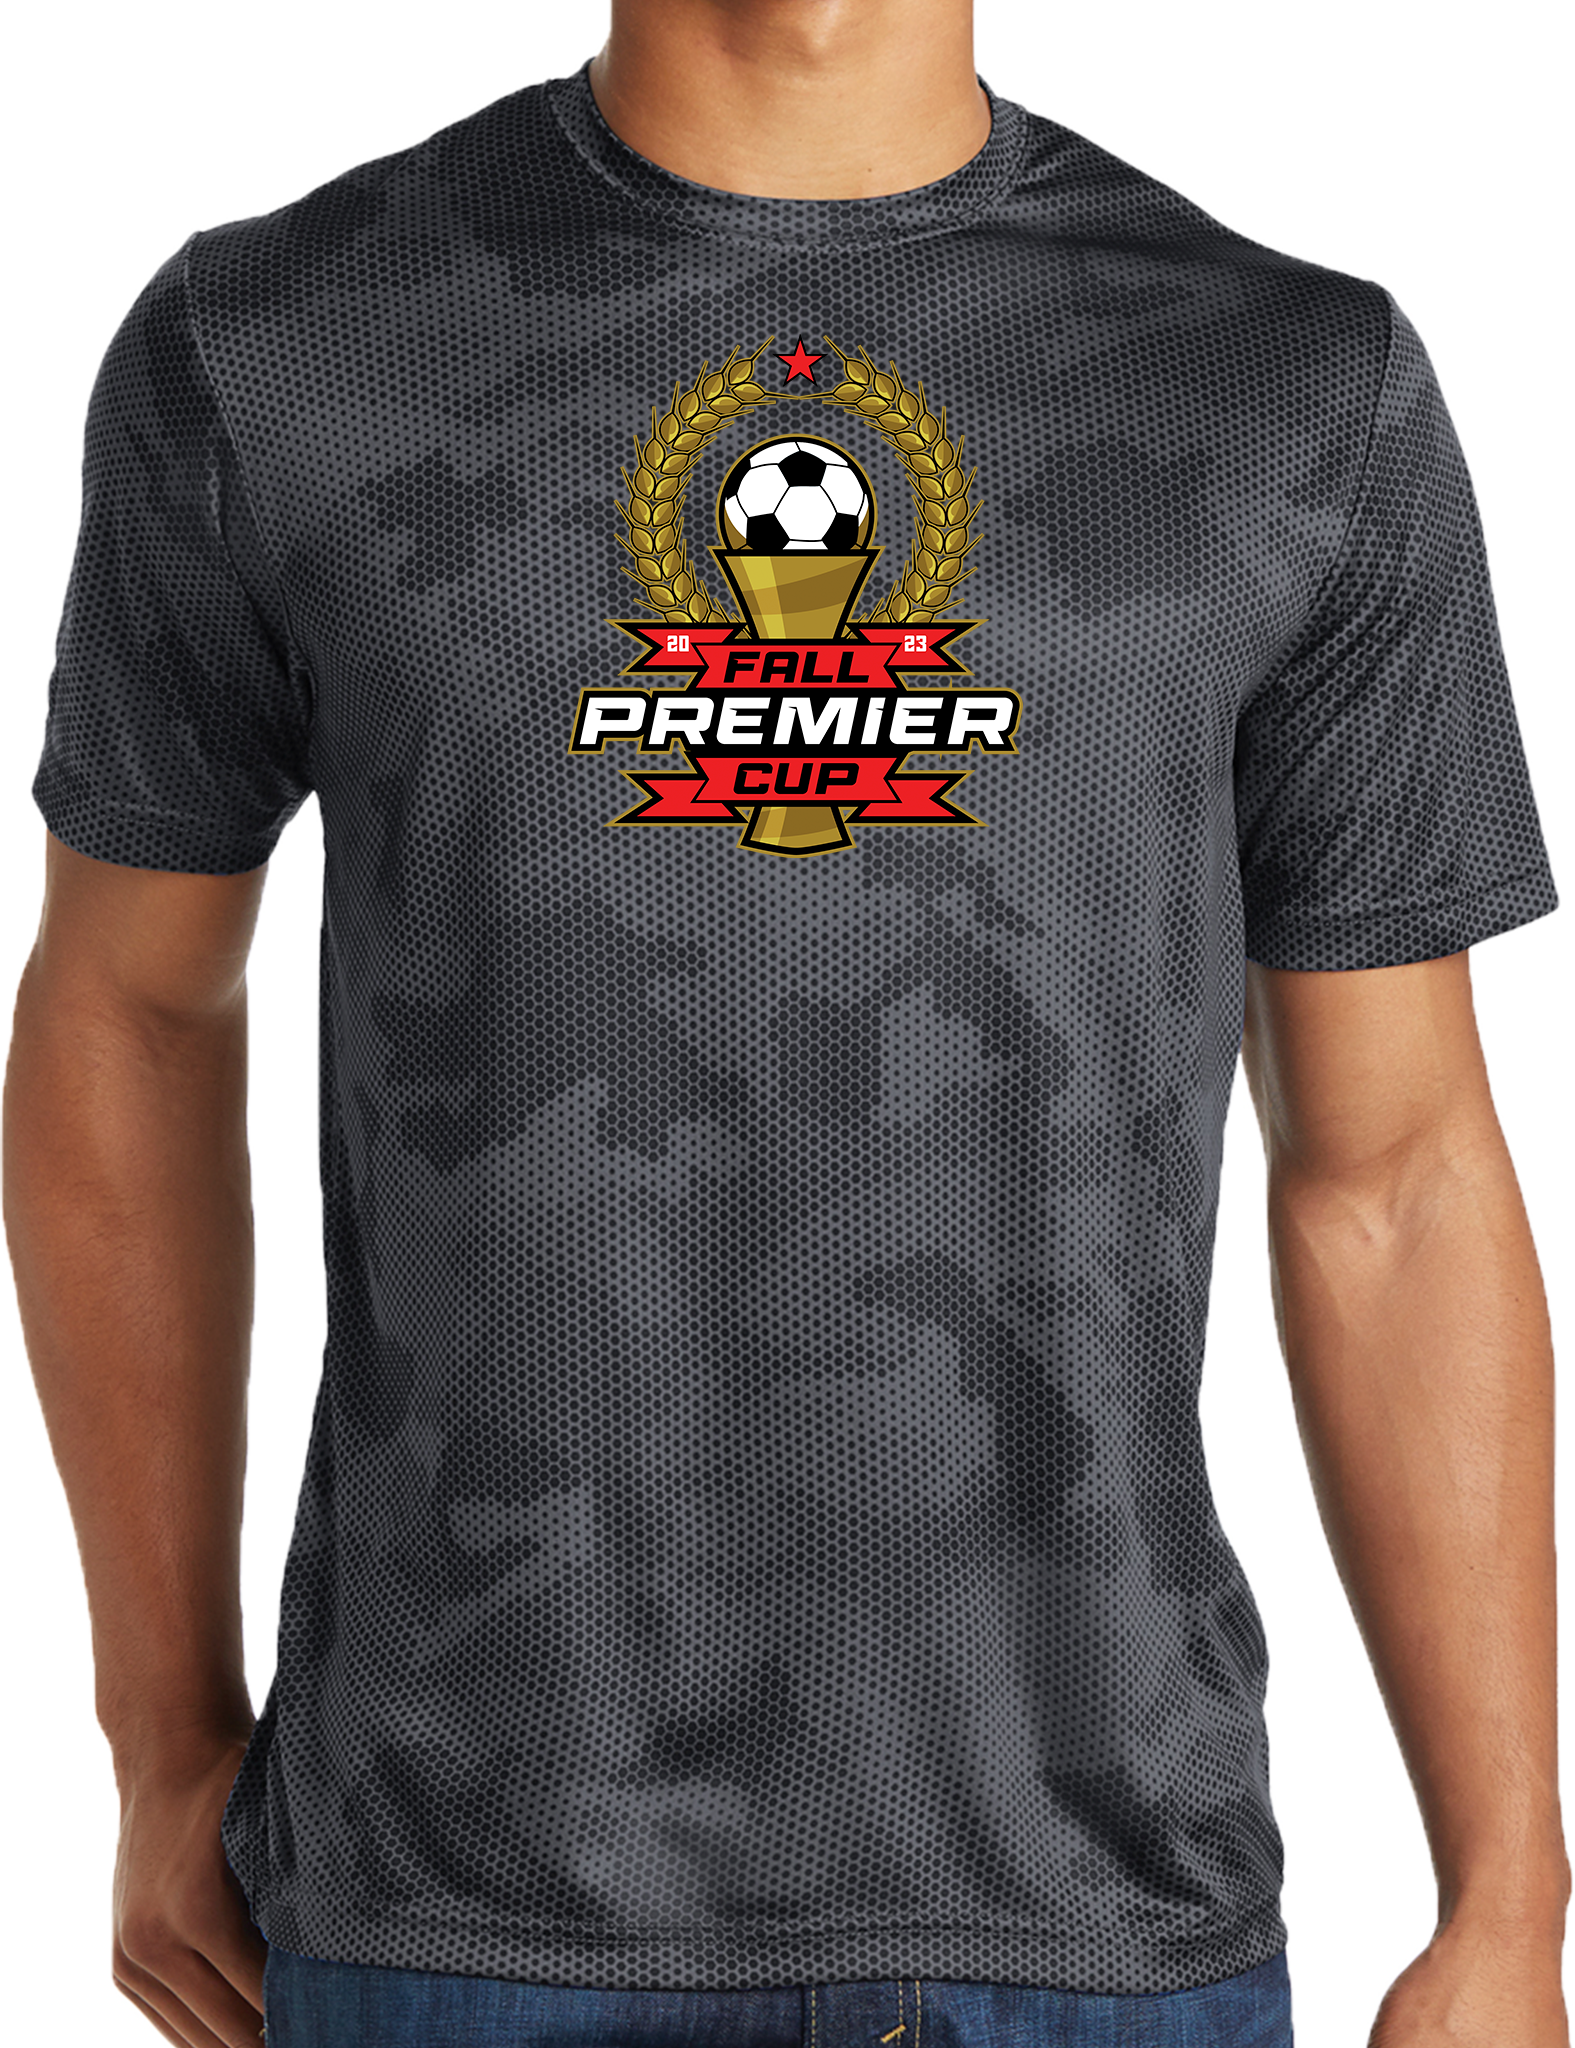 PERFORMANCE SHIRTS - 2023 Fall Premier Cup